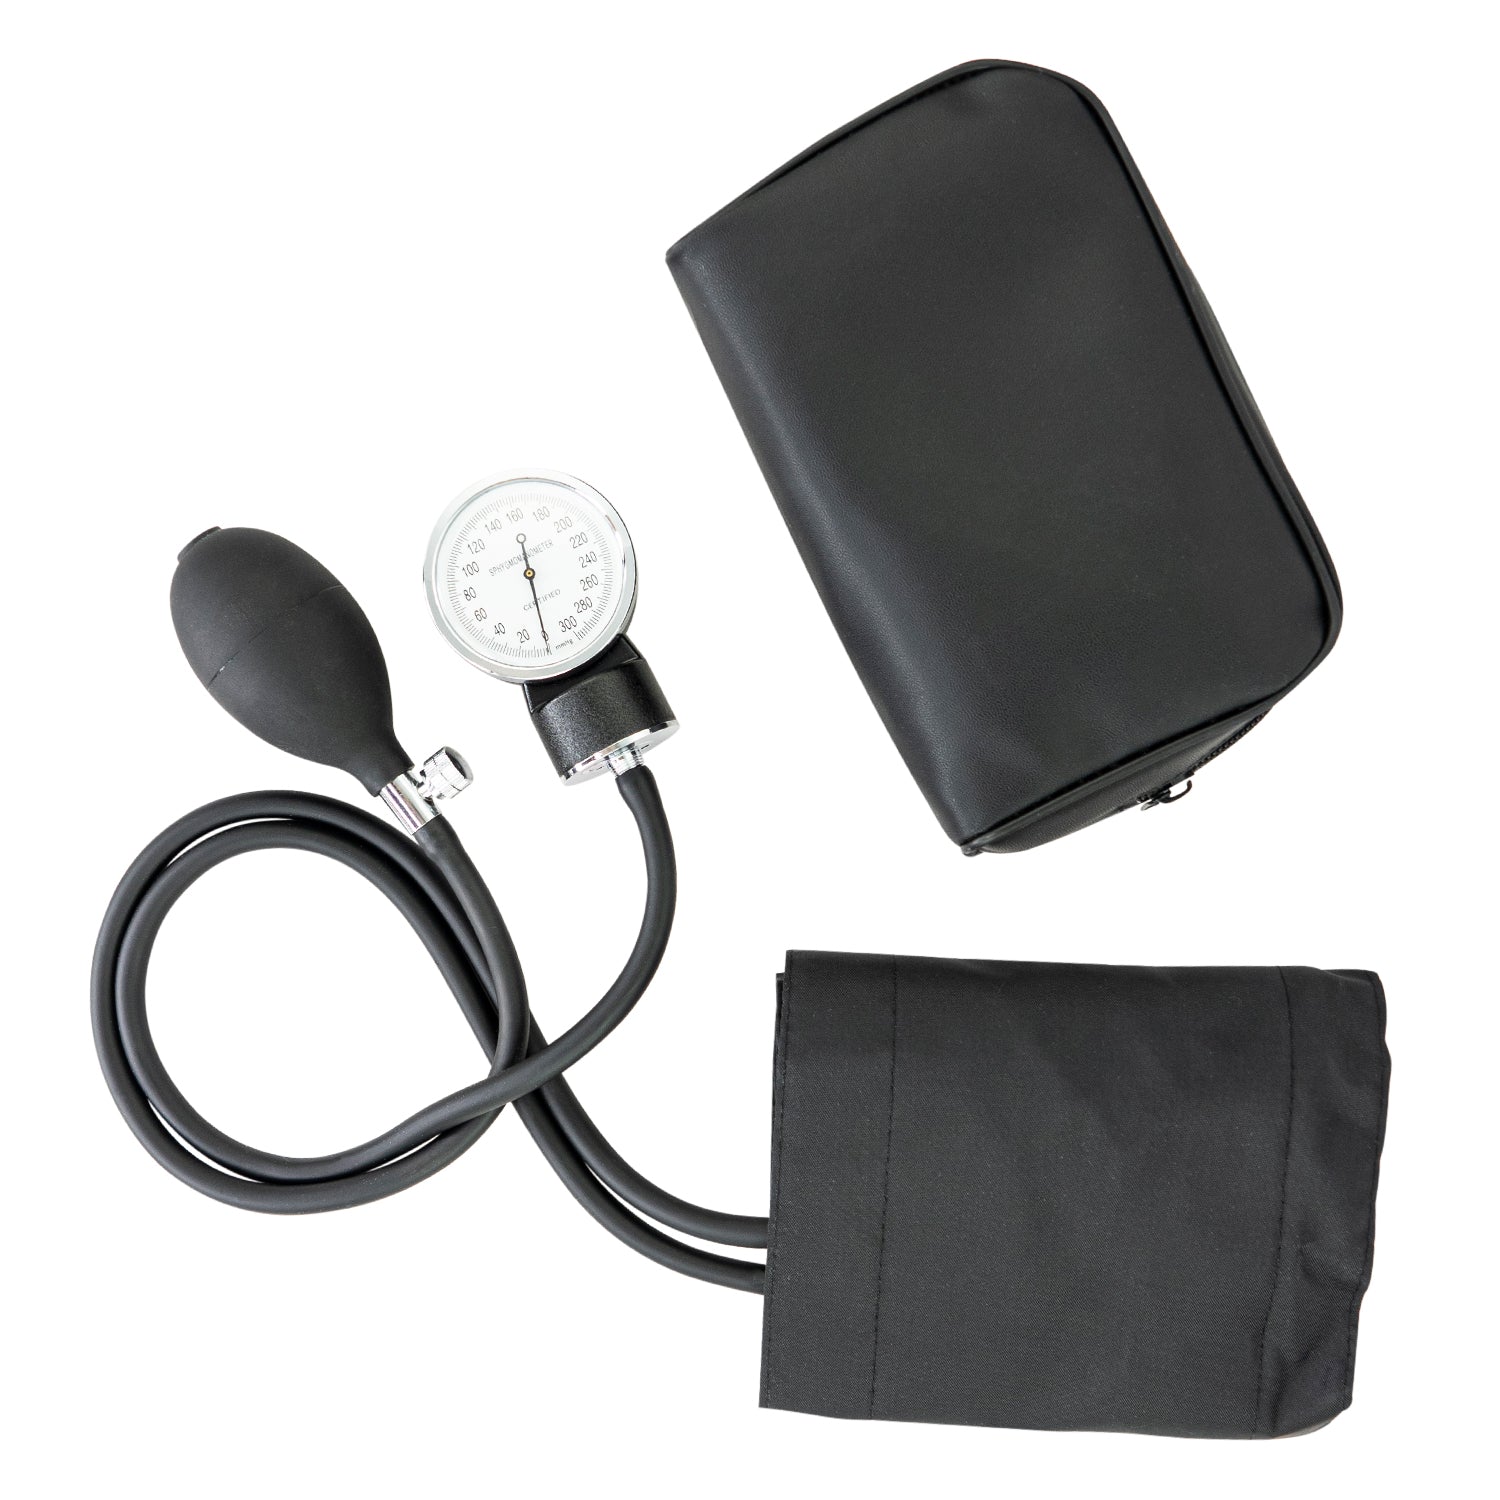 Greater Goods Sphygmomanometer Manual Blood Pressure Monitor Kit, Includes  Travel Case, Bulb, Cuff for Upper Arm Clinical Accuracy 